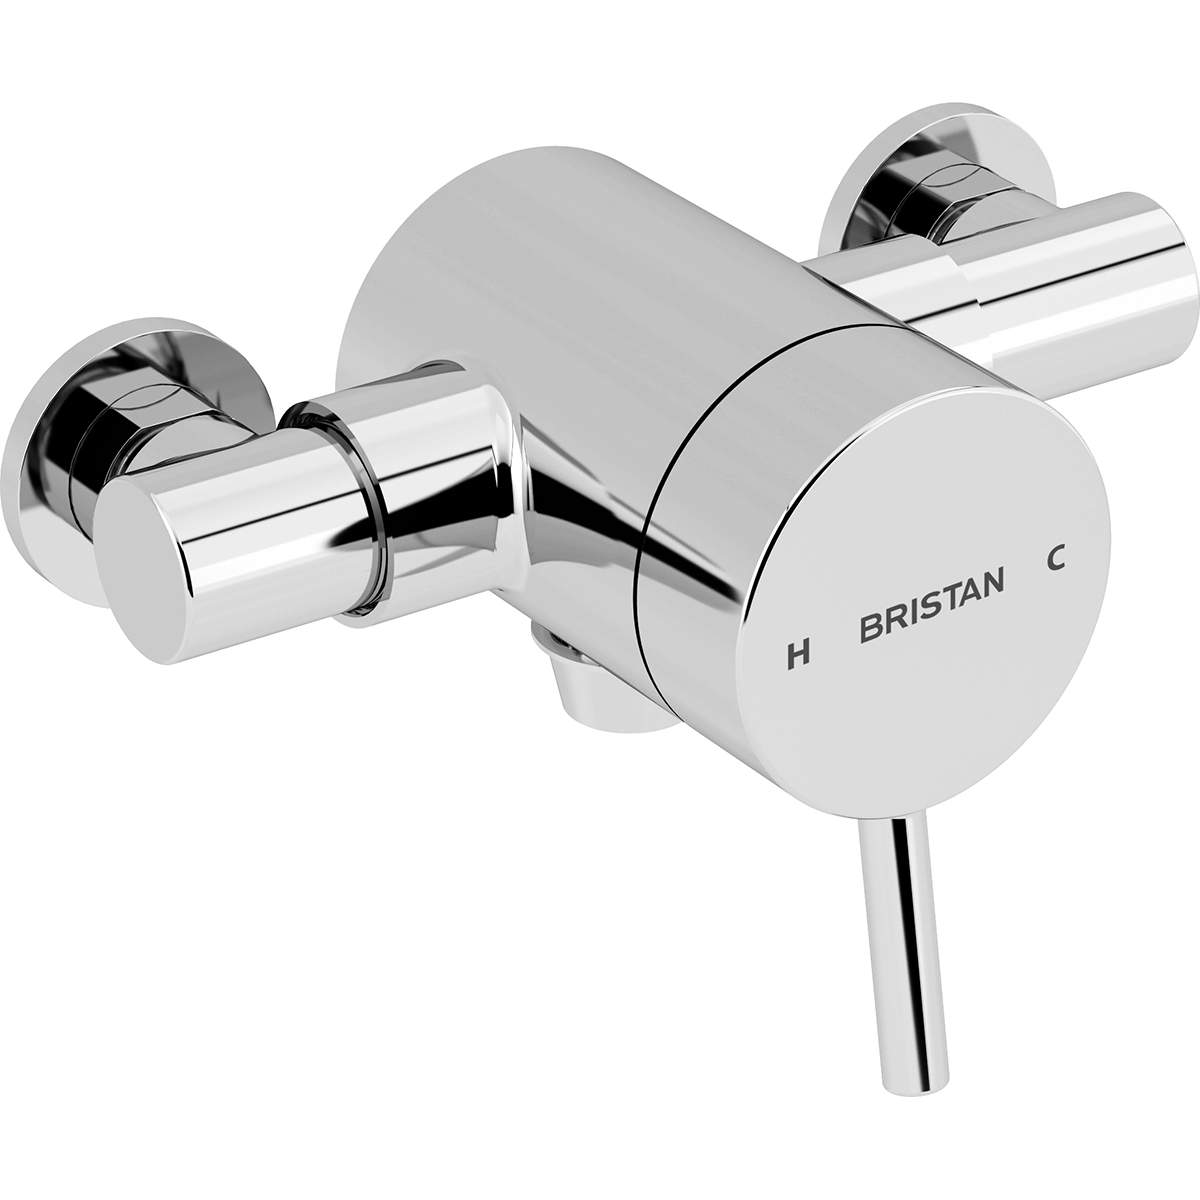 Bristan Prism Exposed Single Control Shower with Bottom Outlet (PM2 SQSHXVO C)